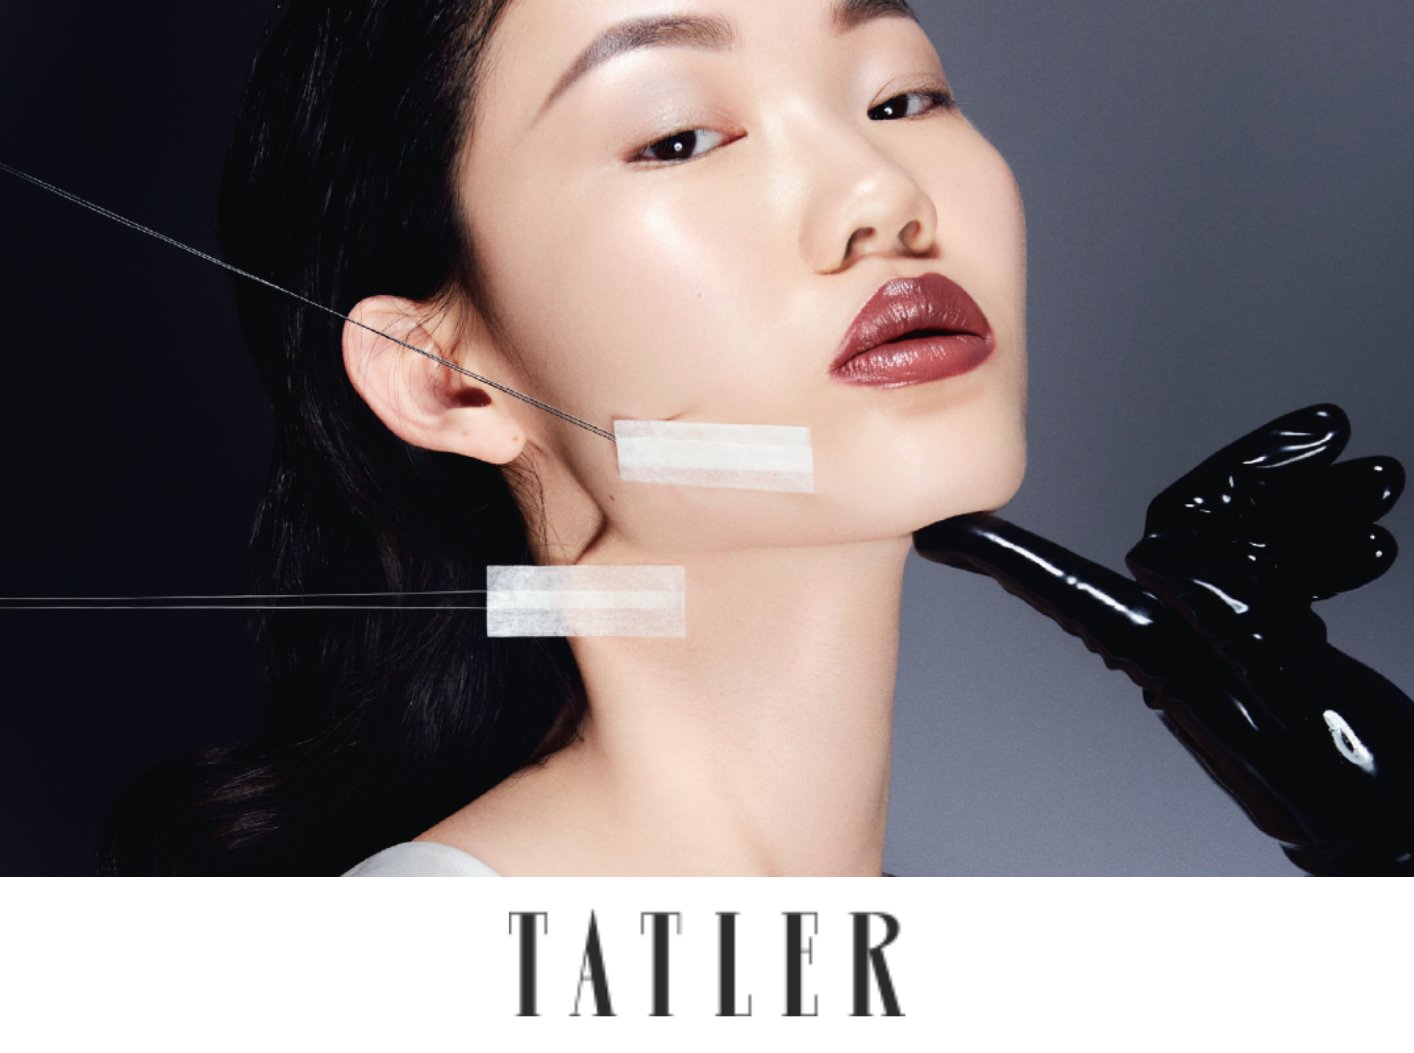 Expert CoolSculpting Clinic - Tatler's Top Doctor for Body Treatments